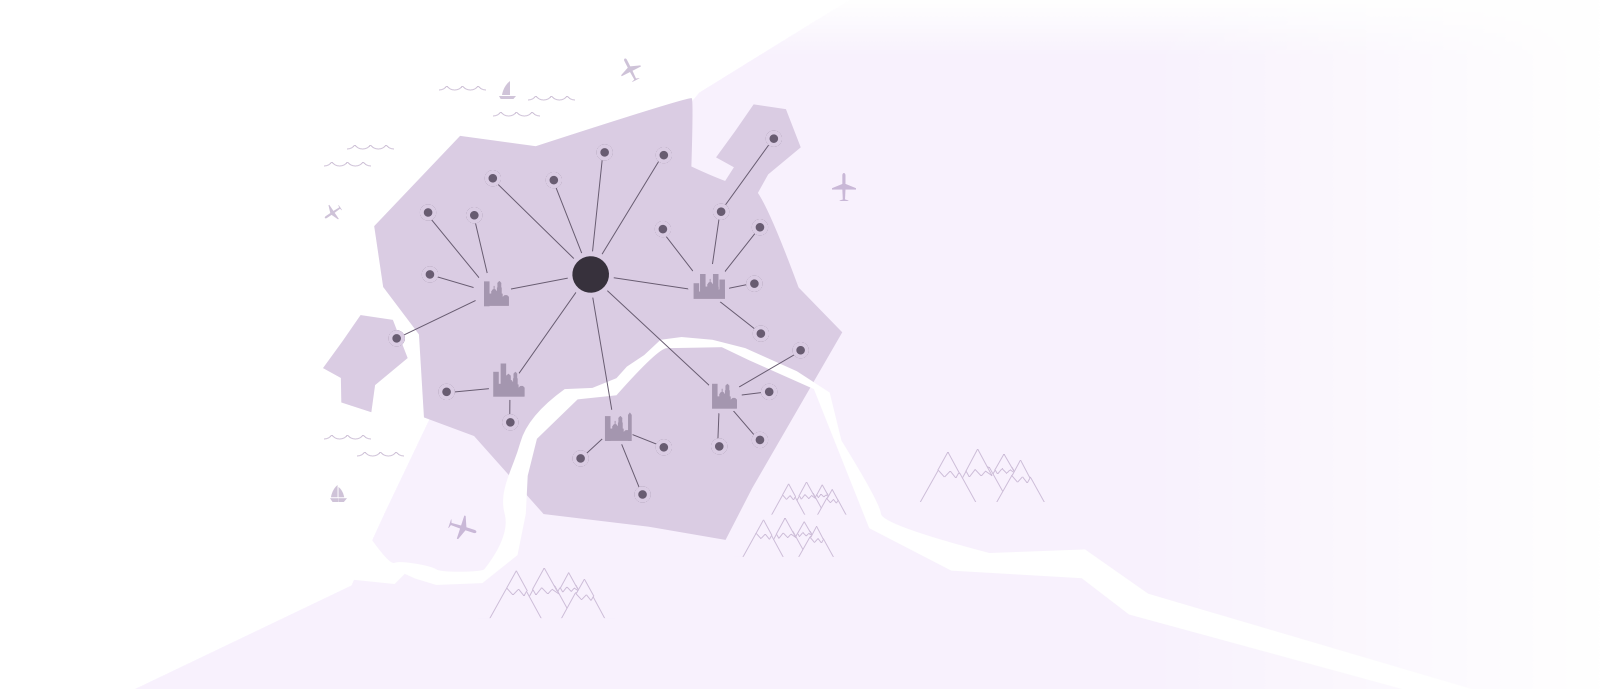 territory with connections